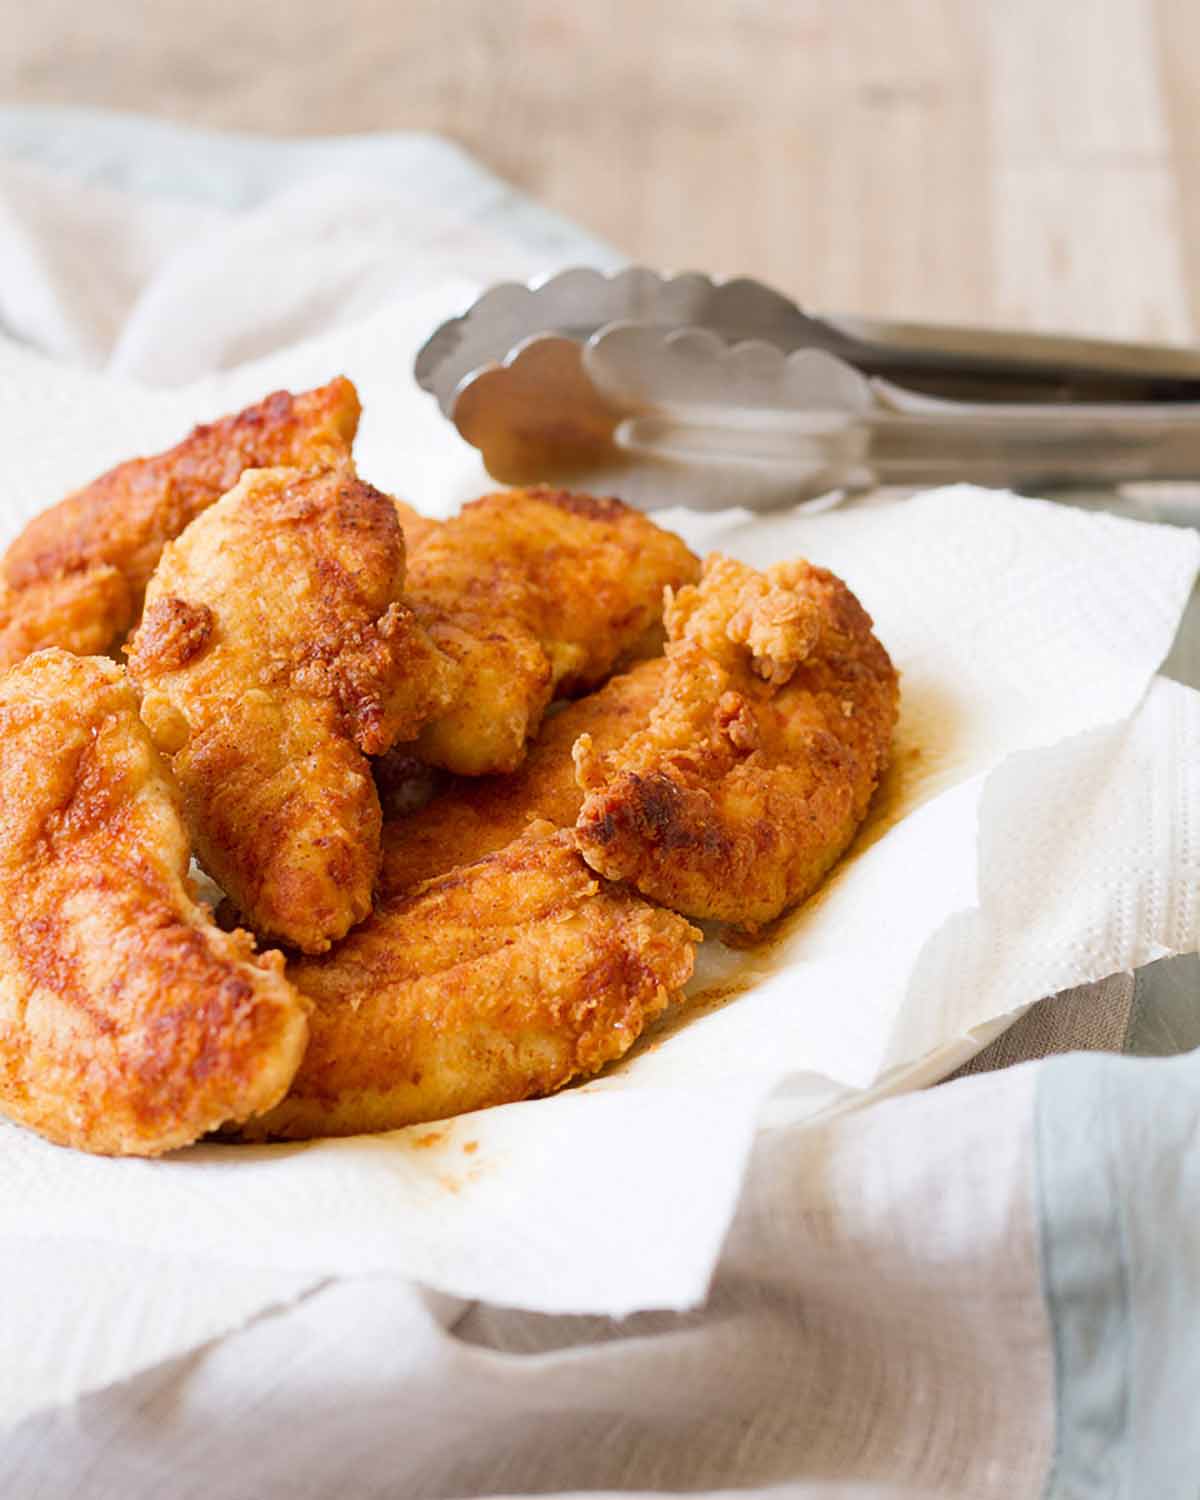 Eight pan-fried chicken tenders piled on paper towels on a plate.